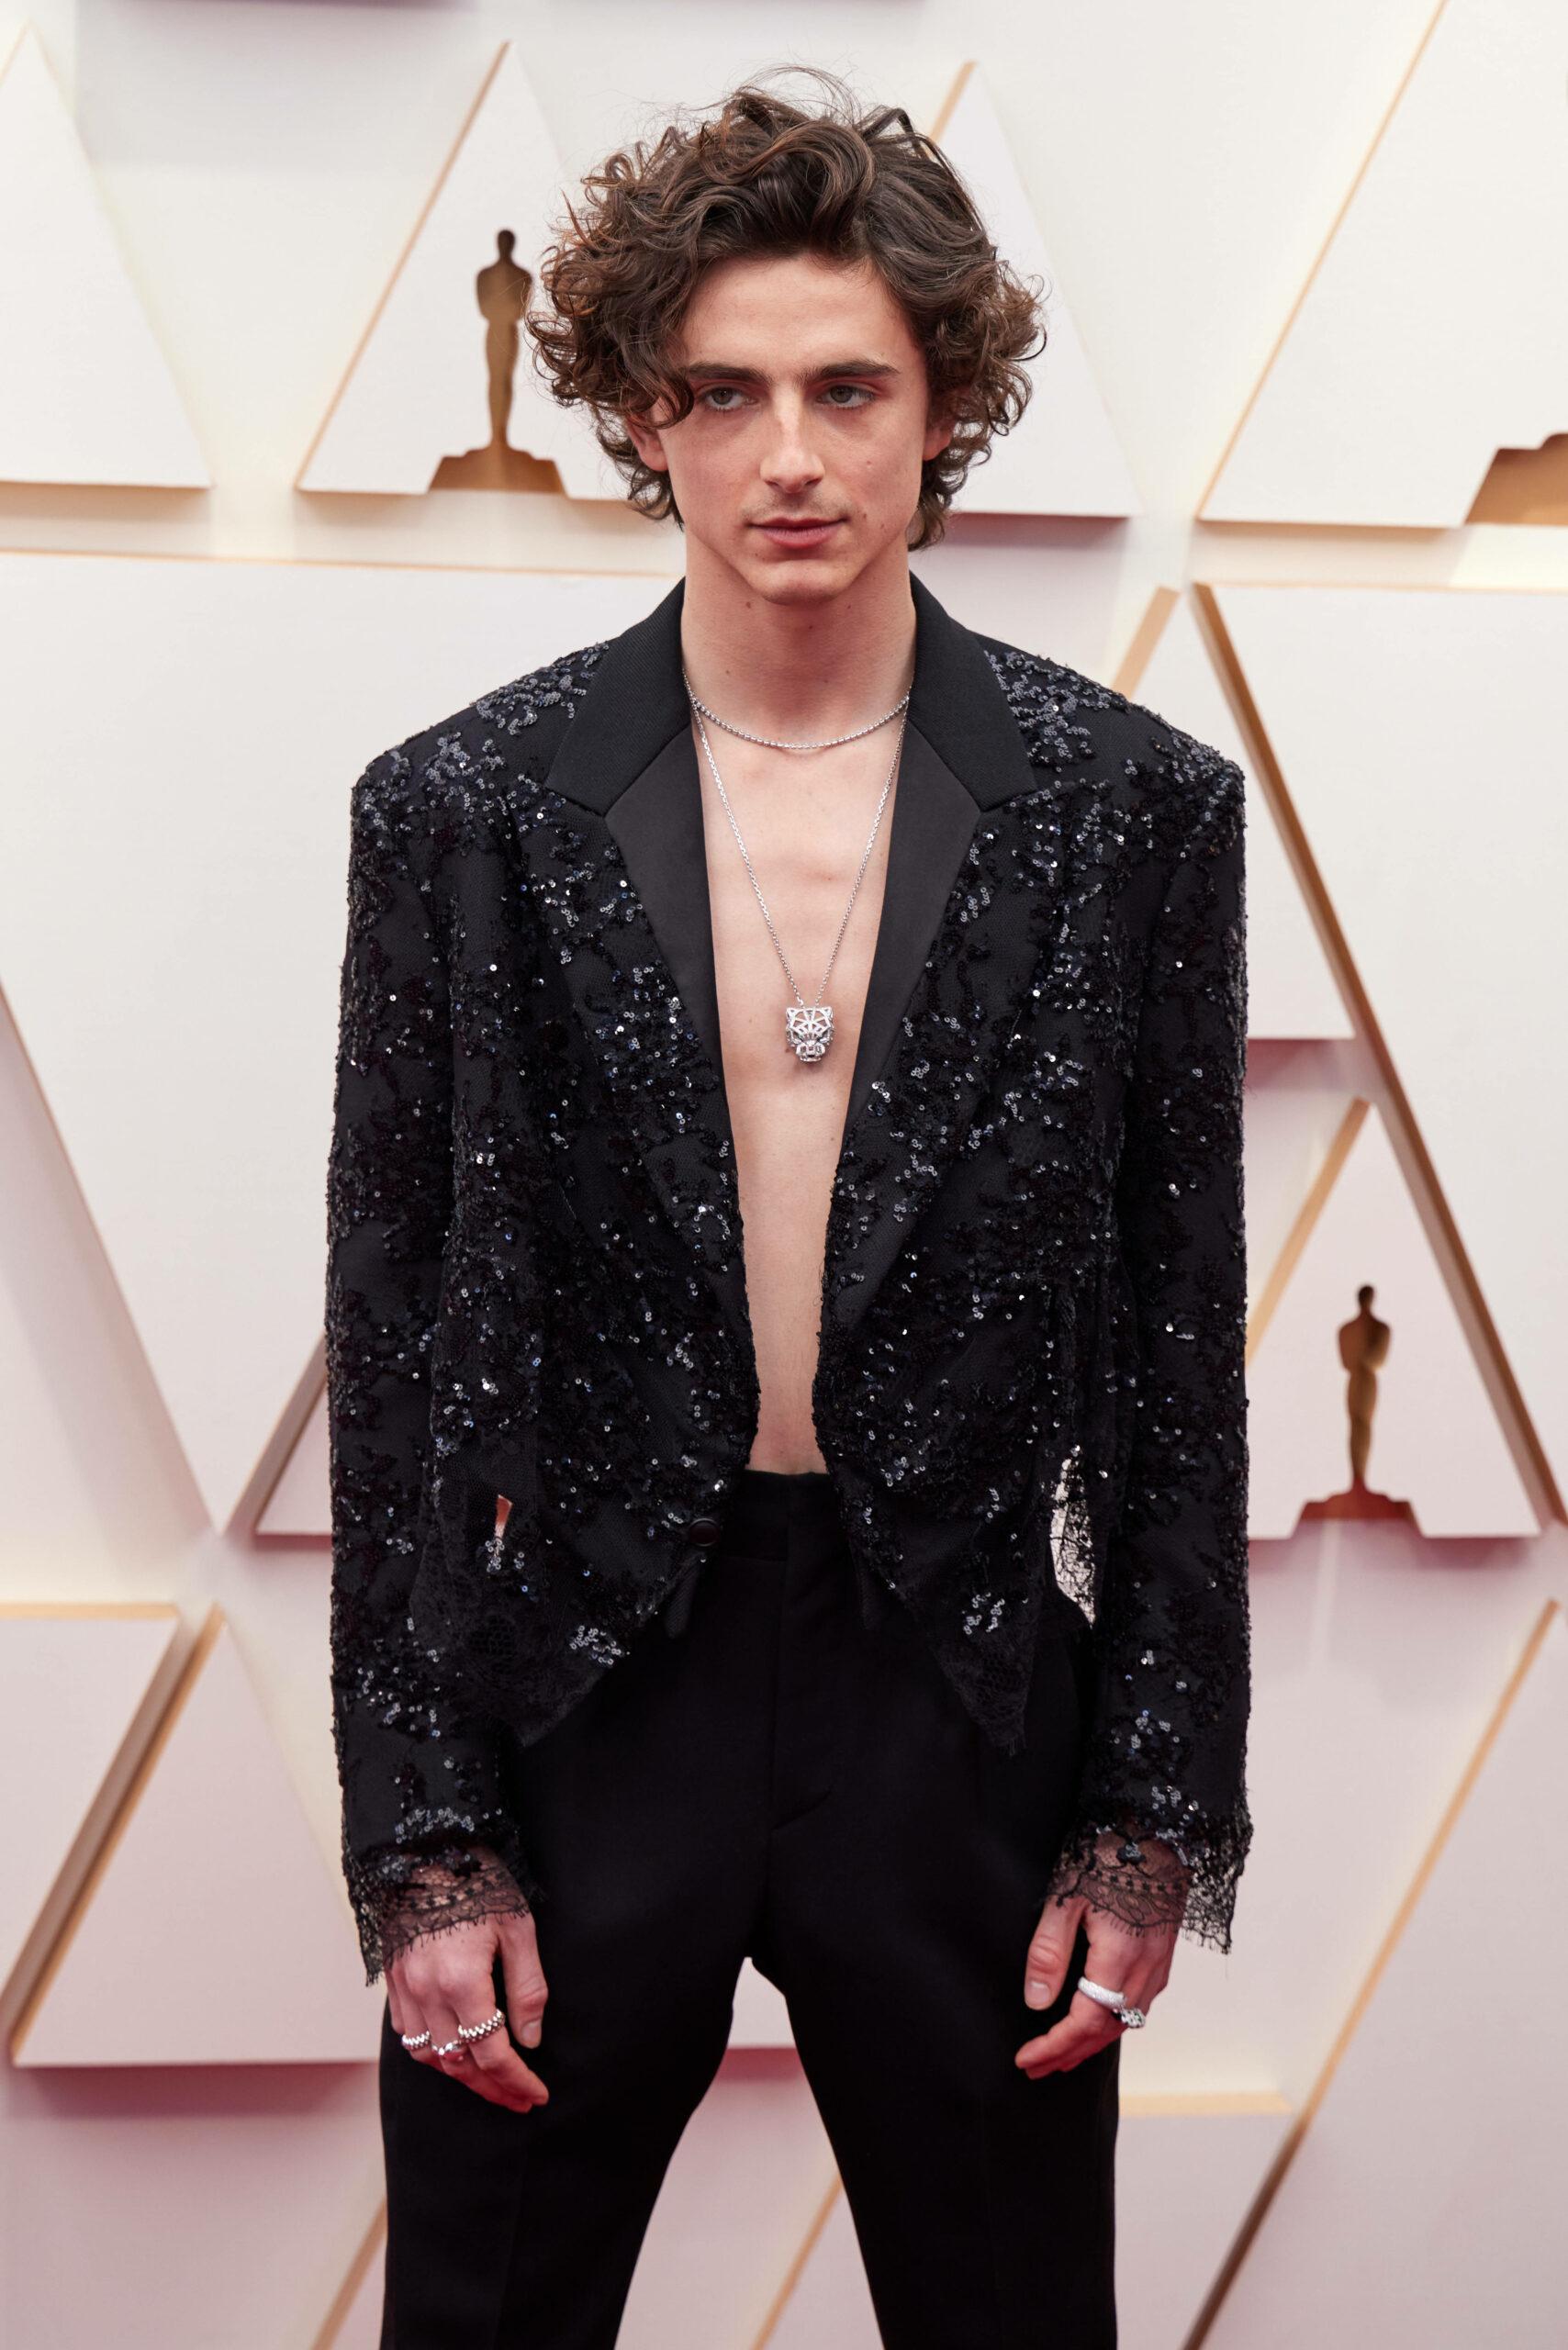 March 27, 2022, Hollywood, California, USA: Timothee Chalamet arrives on the red carpet of the 94th Oscars.